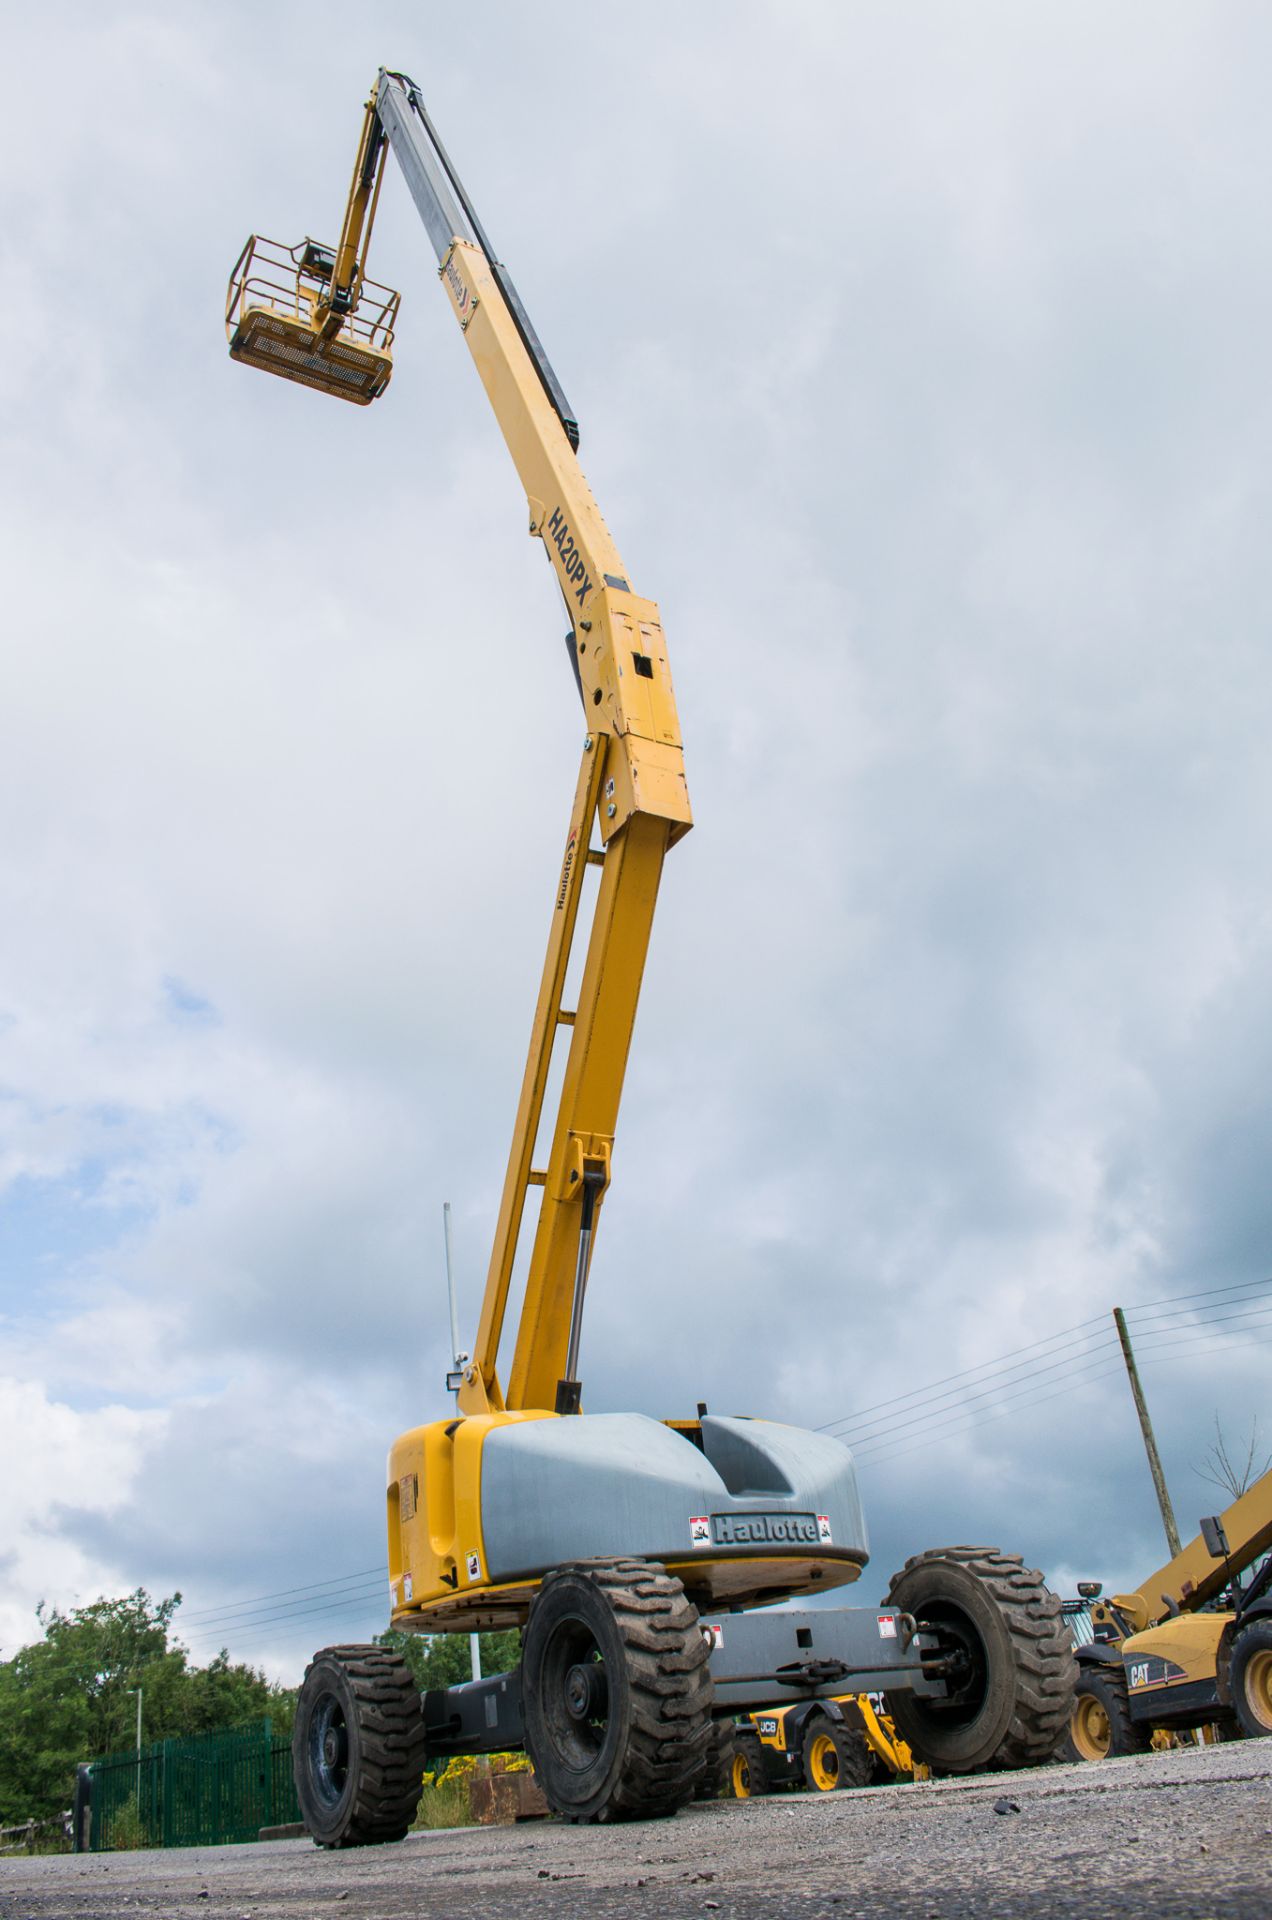 HAULOTTE HA20PX diesel driven articulated boom lift access platform Year: 2012 S/N: AD400588 - Image 7 of 14